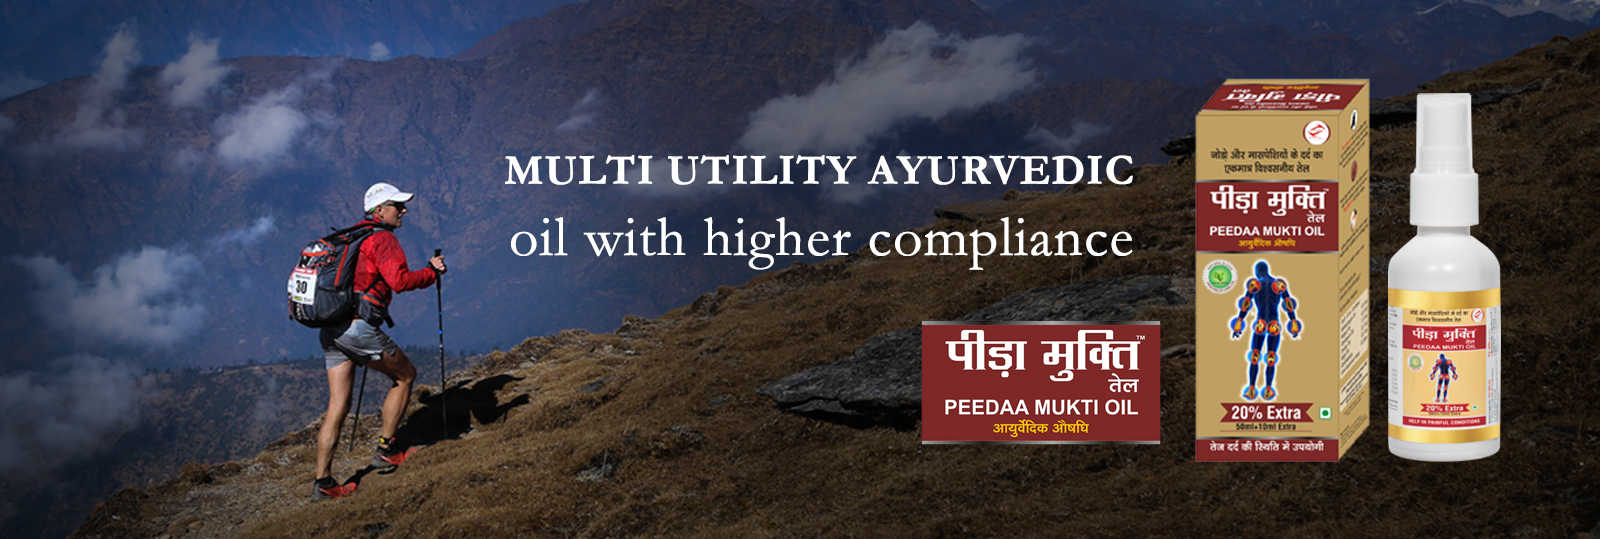 multi utility ayurvedic oil with higher compliance